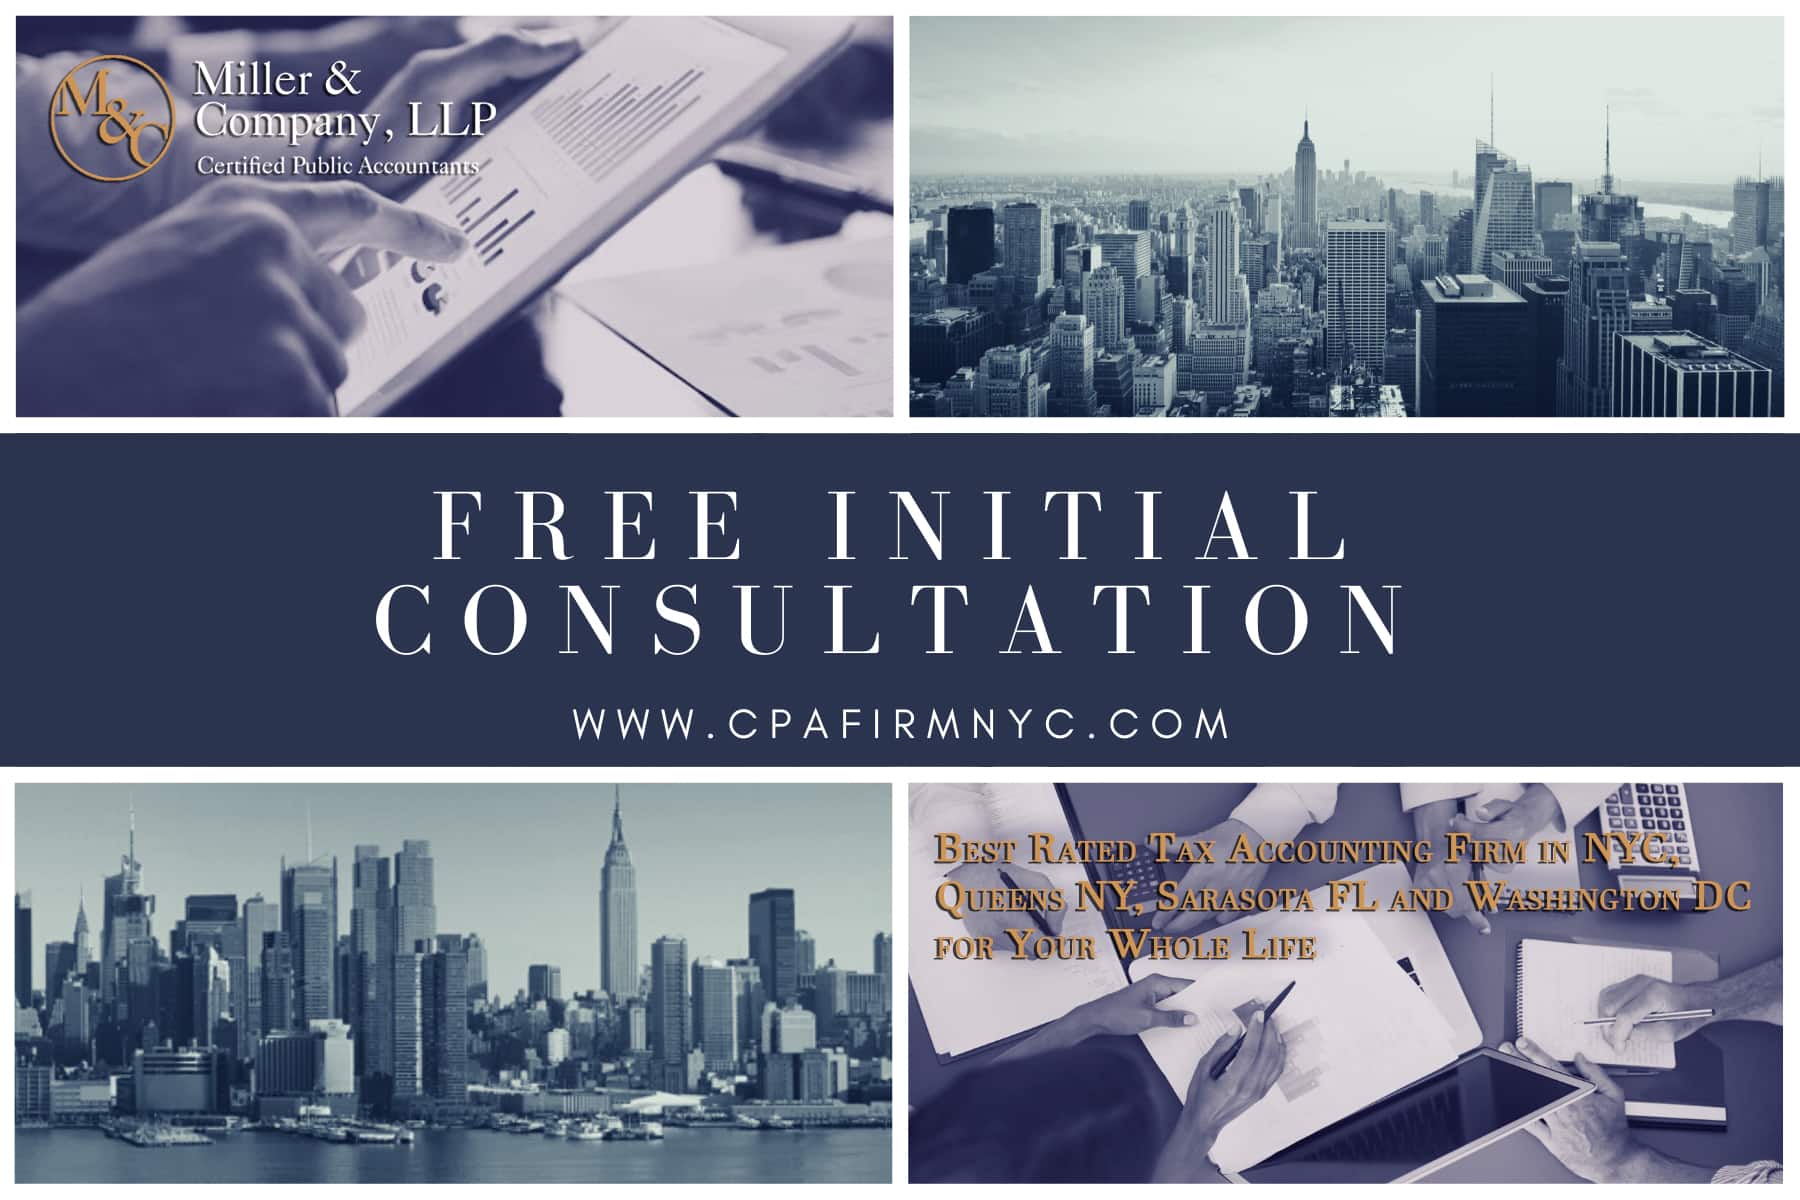 Miller & Company LLP: CPA of NYC - New York, NY, US, business consulting